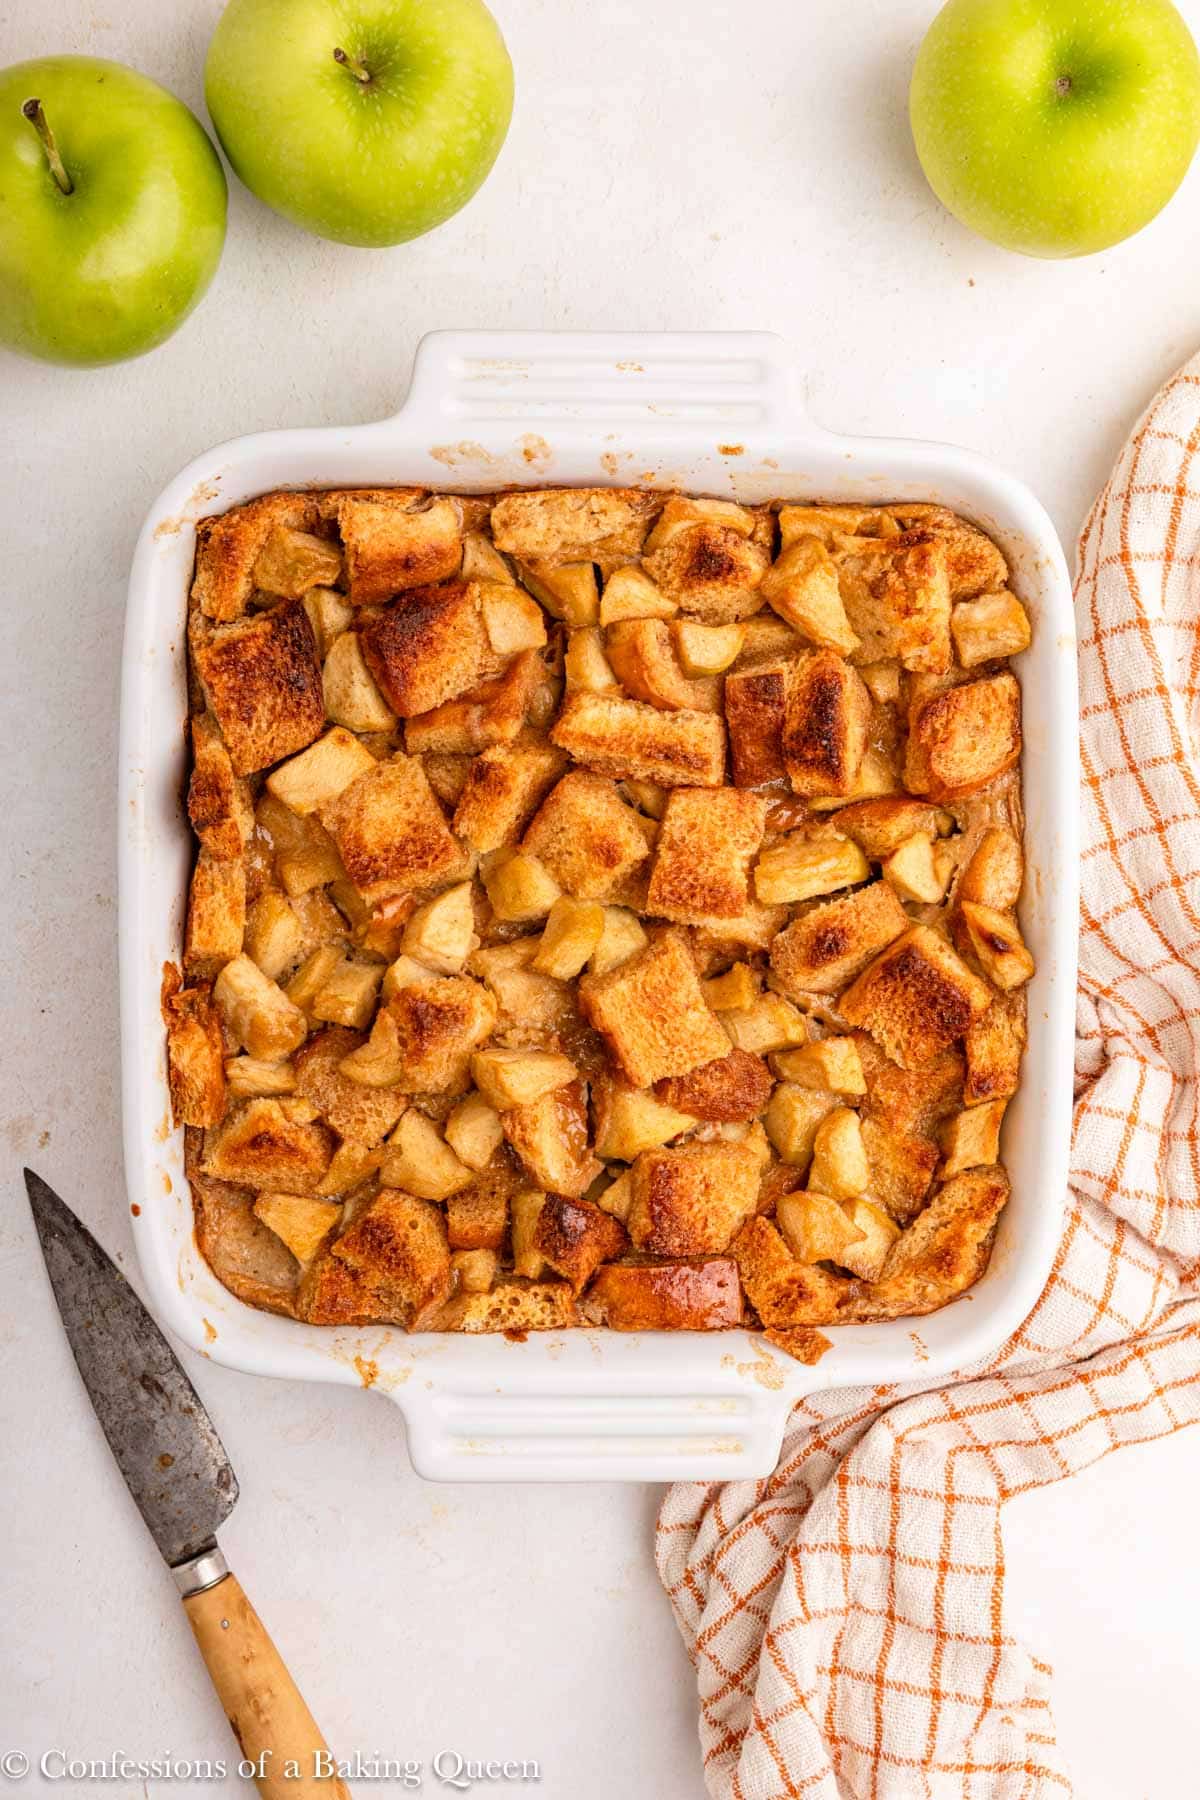 apple bread pudding just baked on a light surface with an orange linen and apples.